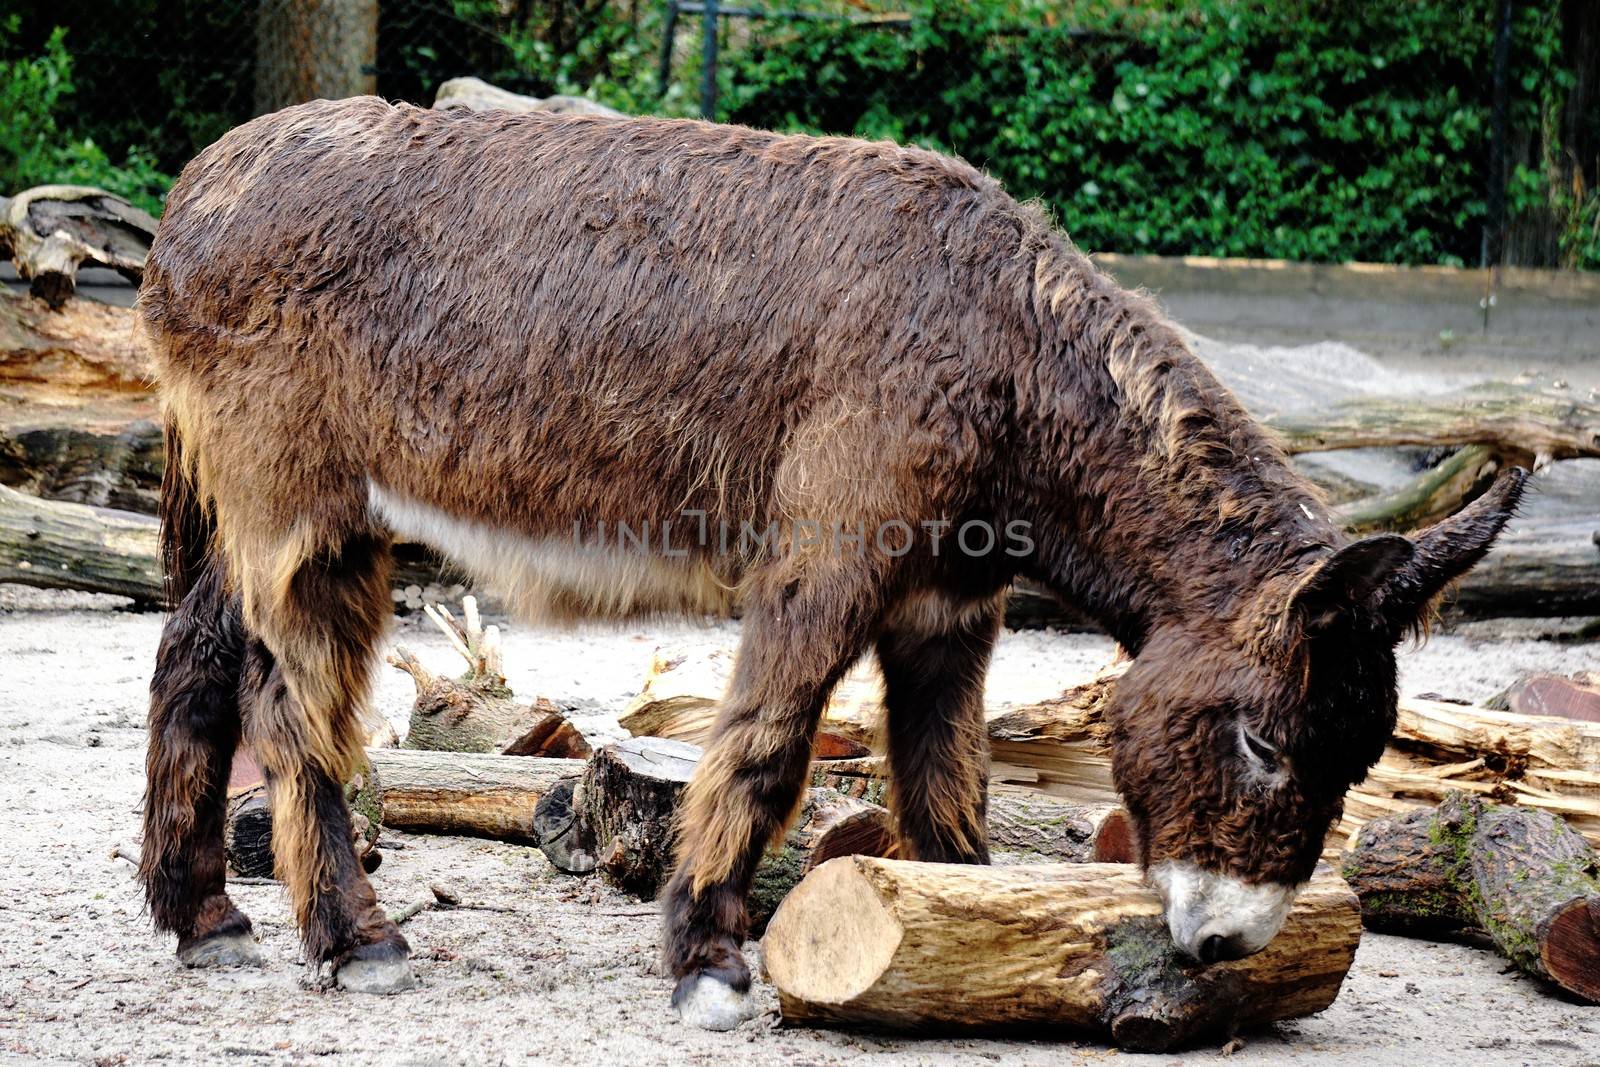 Poitou donkey playing with log by pisces2386